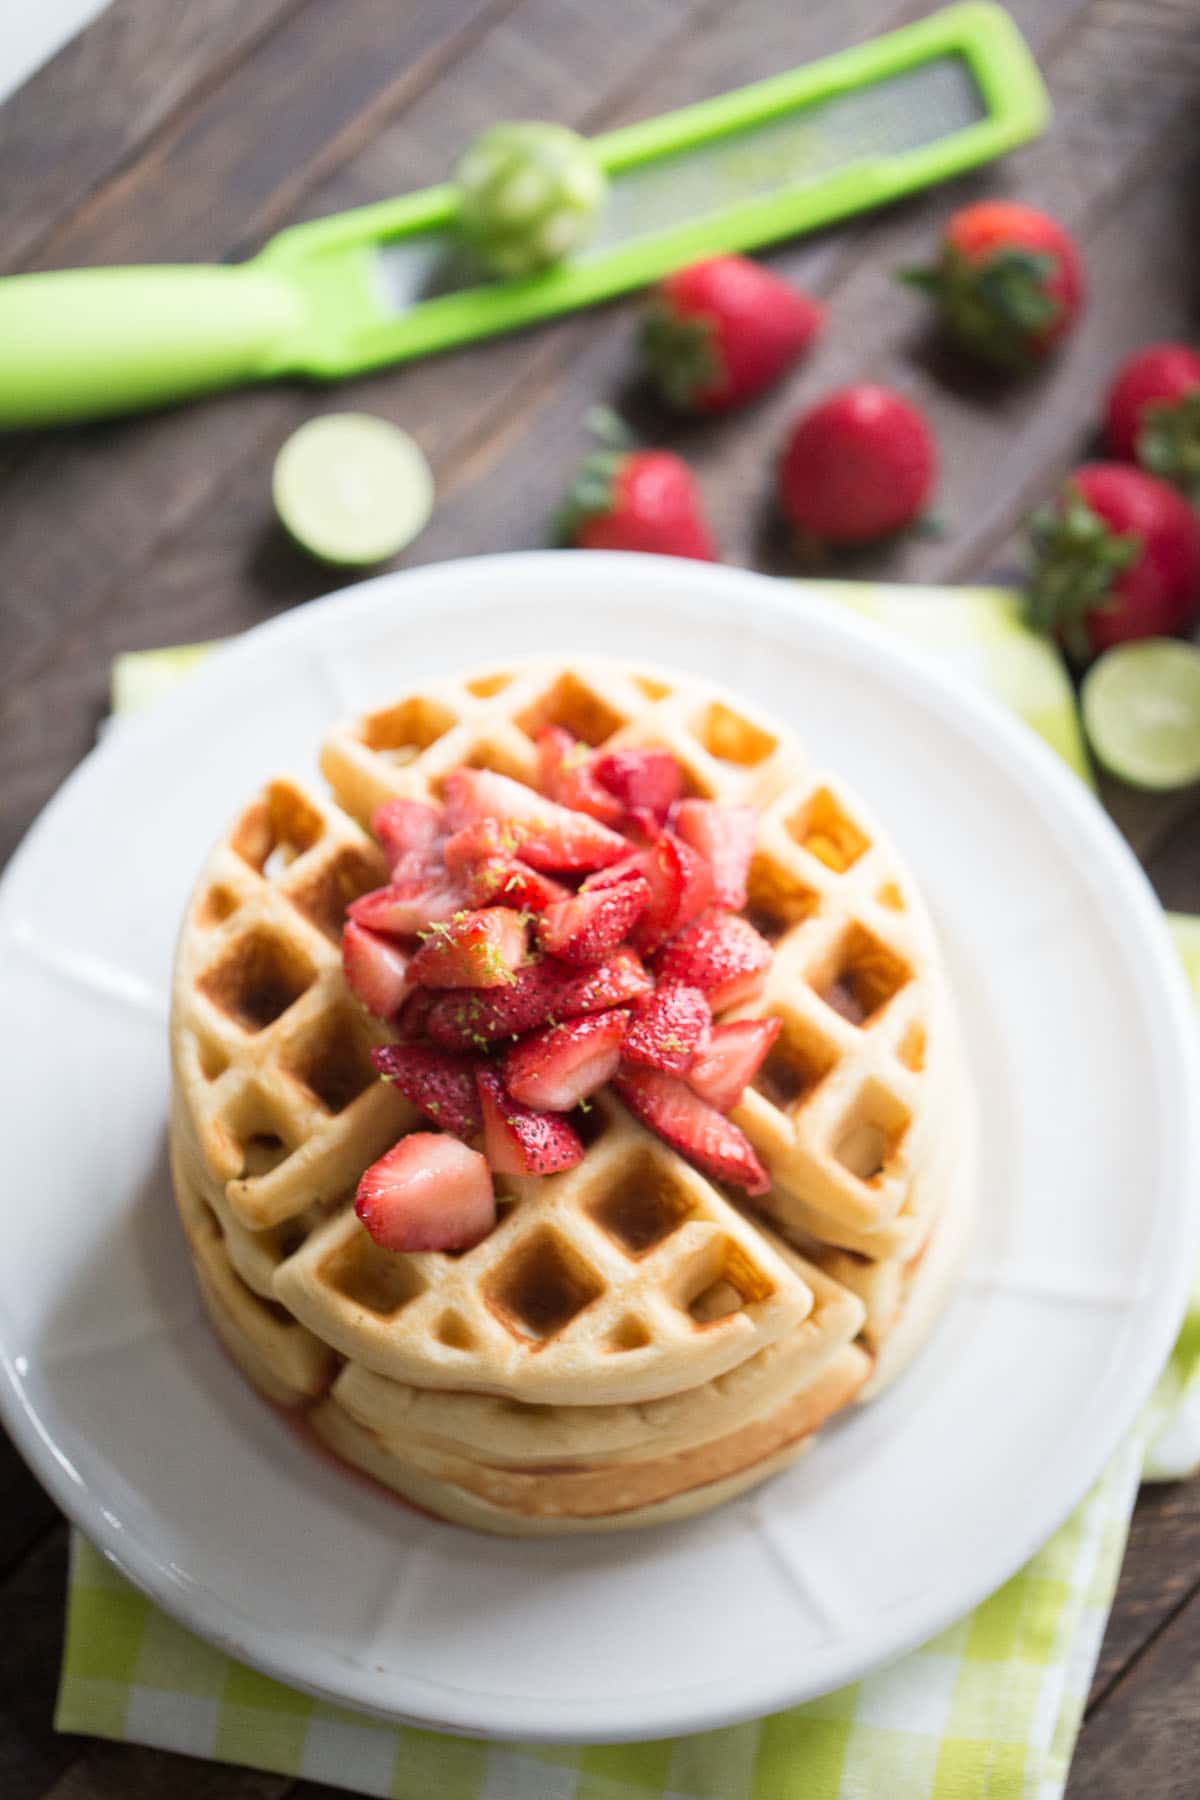 Who doesn't love waffles? This easy homemade waffles recipe is bursting with key lime flavor and is topped with a simple homemade strawberry sauce!